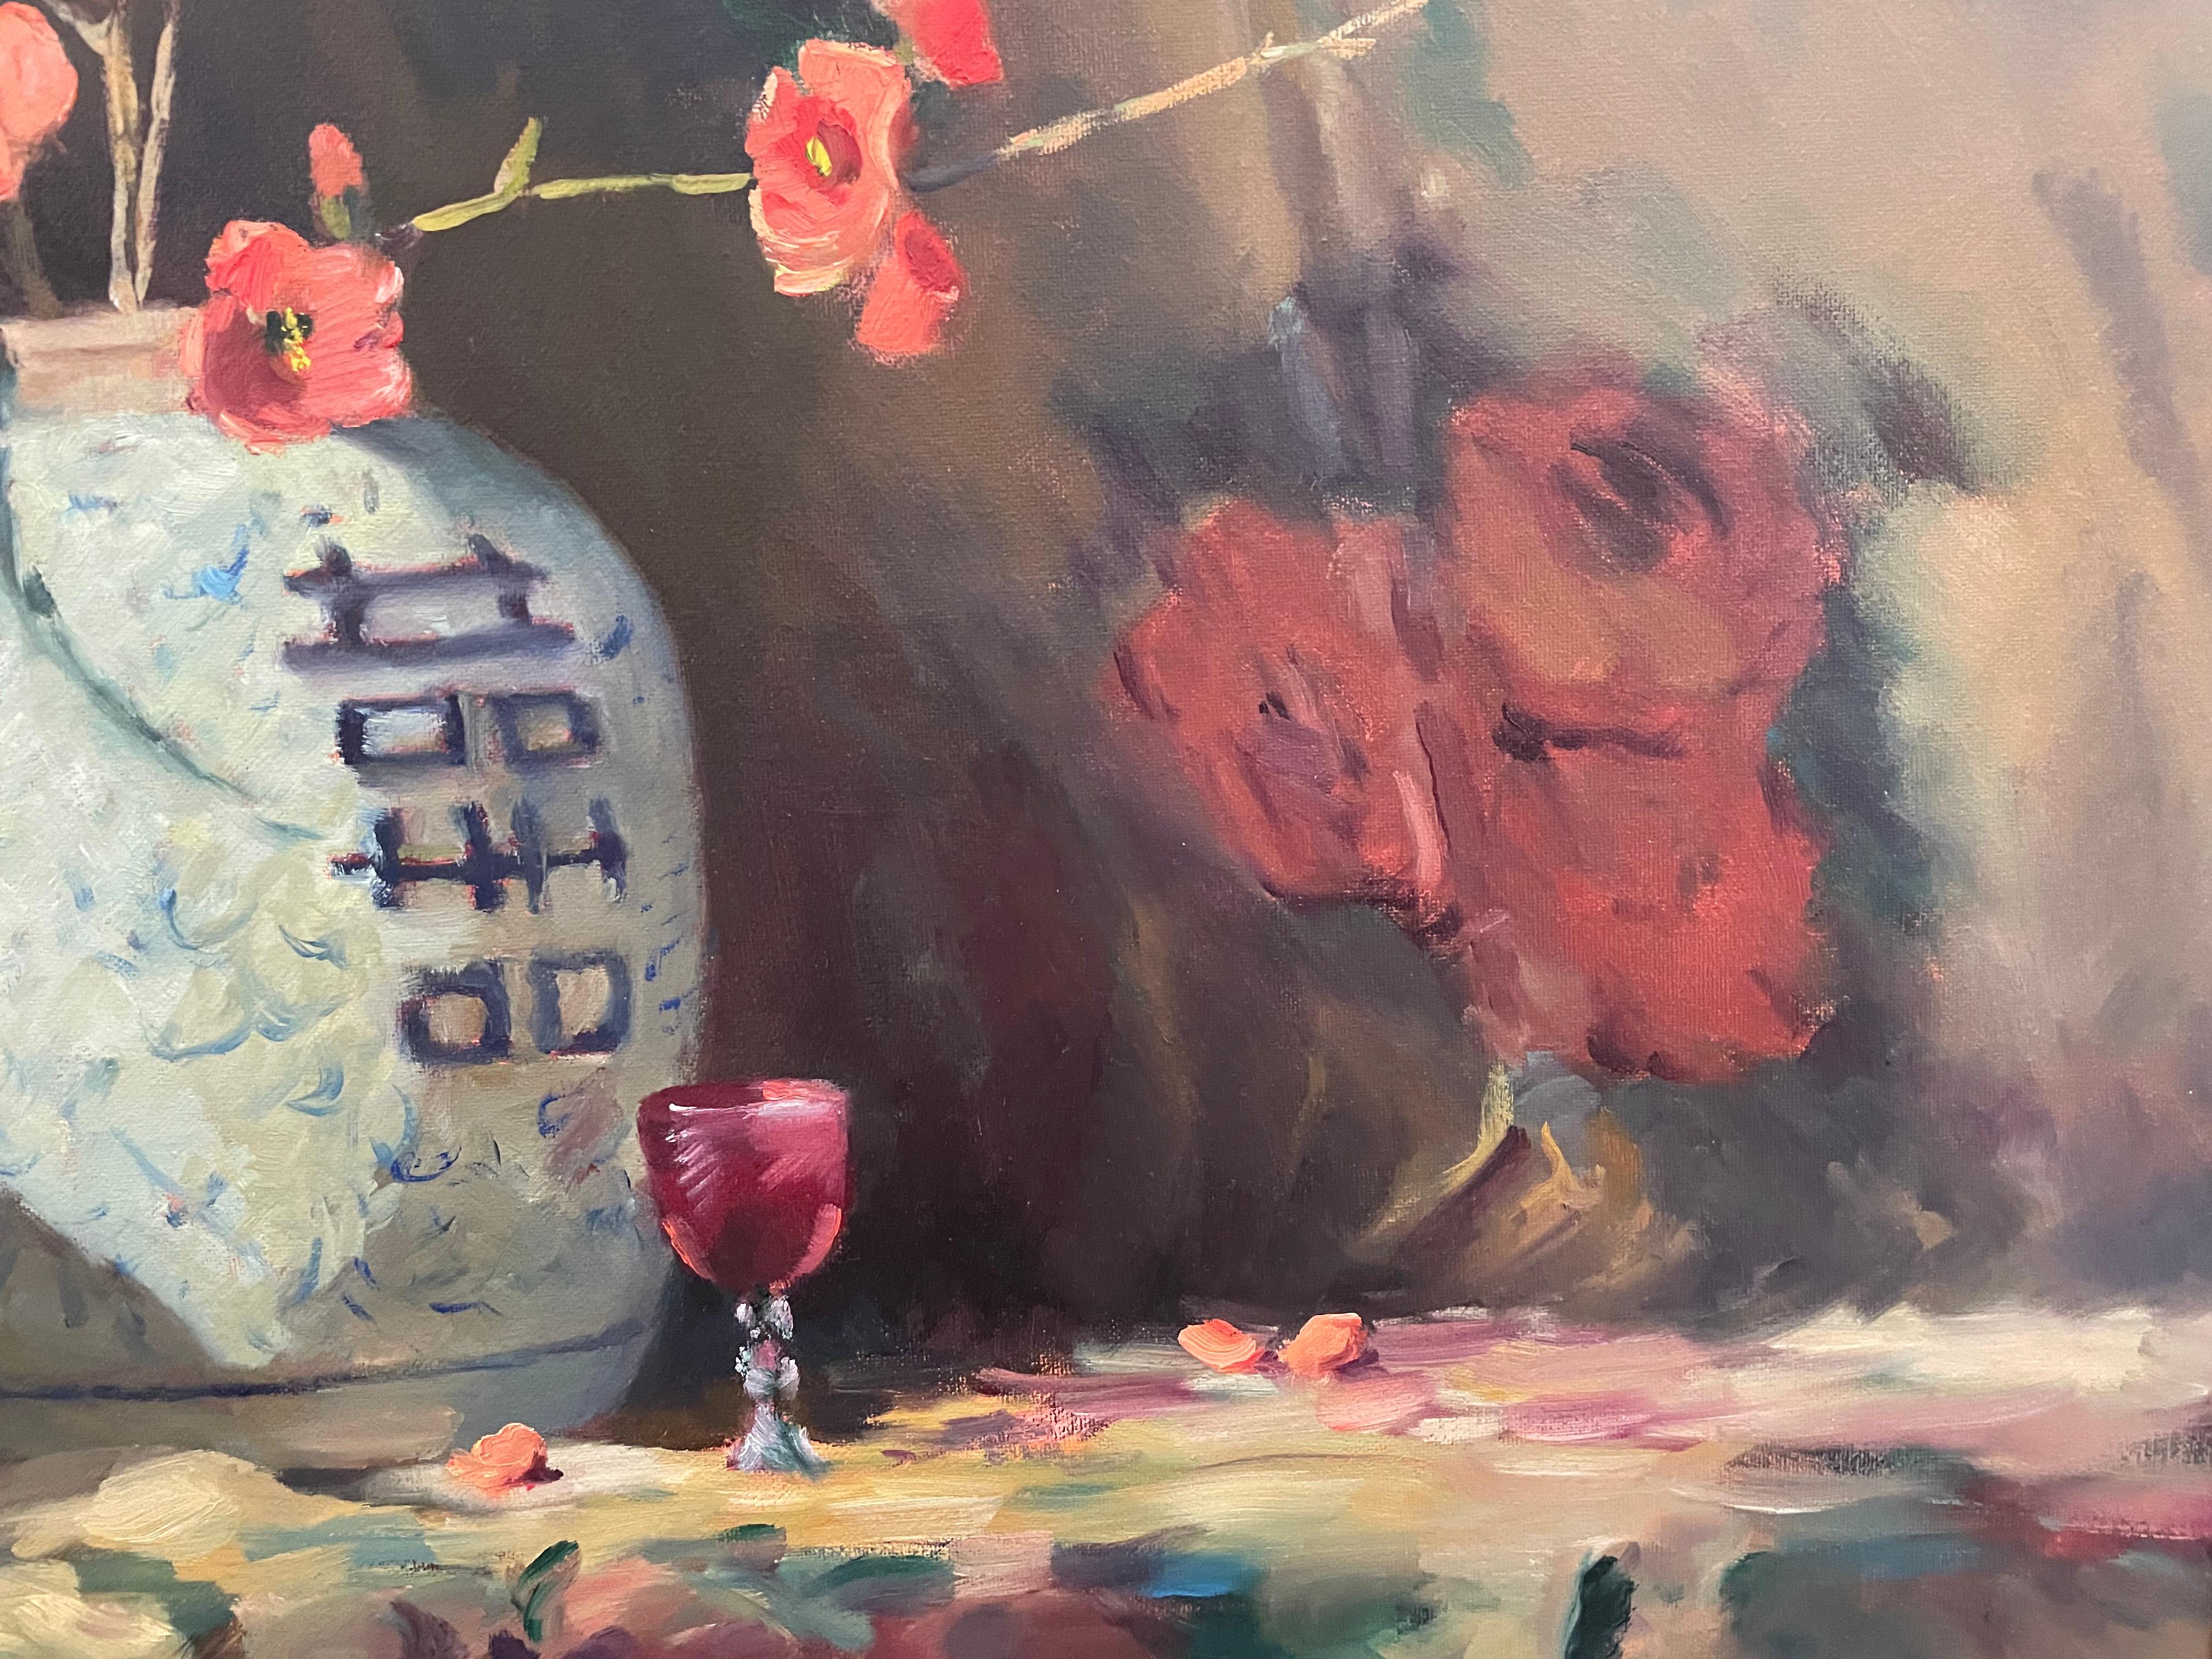 Jacqueline Fowler, Still Life With Japonica, Oil On Canvas - a beautiful decorative work depicting japonica blooms in a Japanese vase.

Jacqueline Fowler was born in England in 1945 Jacqueline now lives and works in Australia. 

She paints in oils